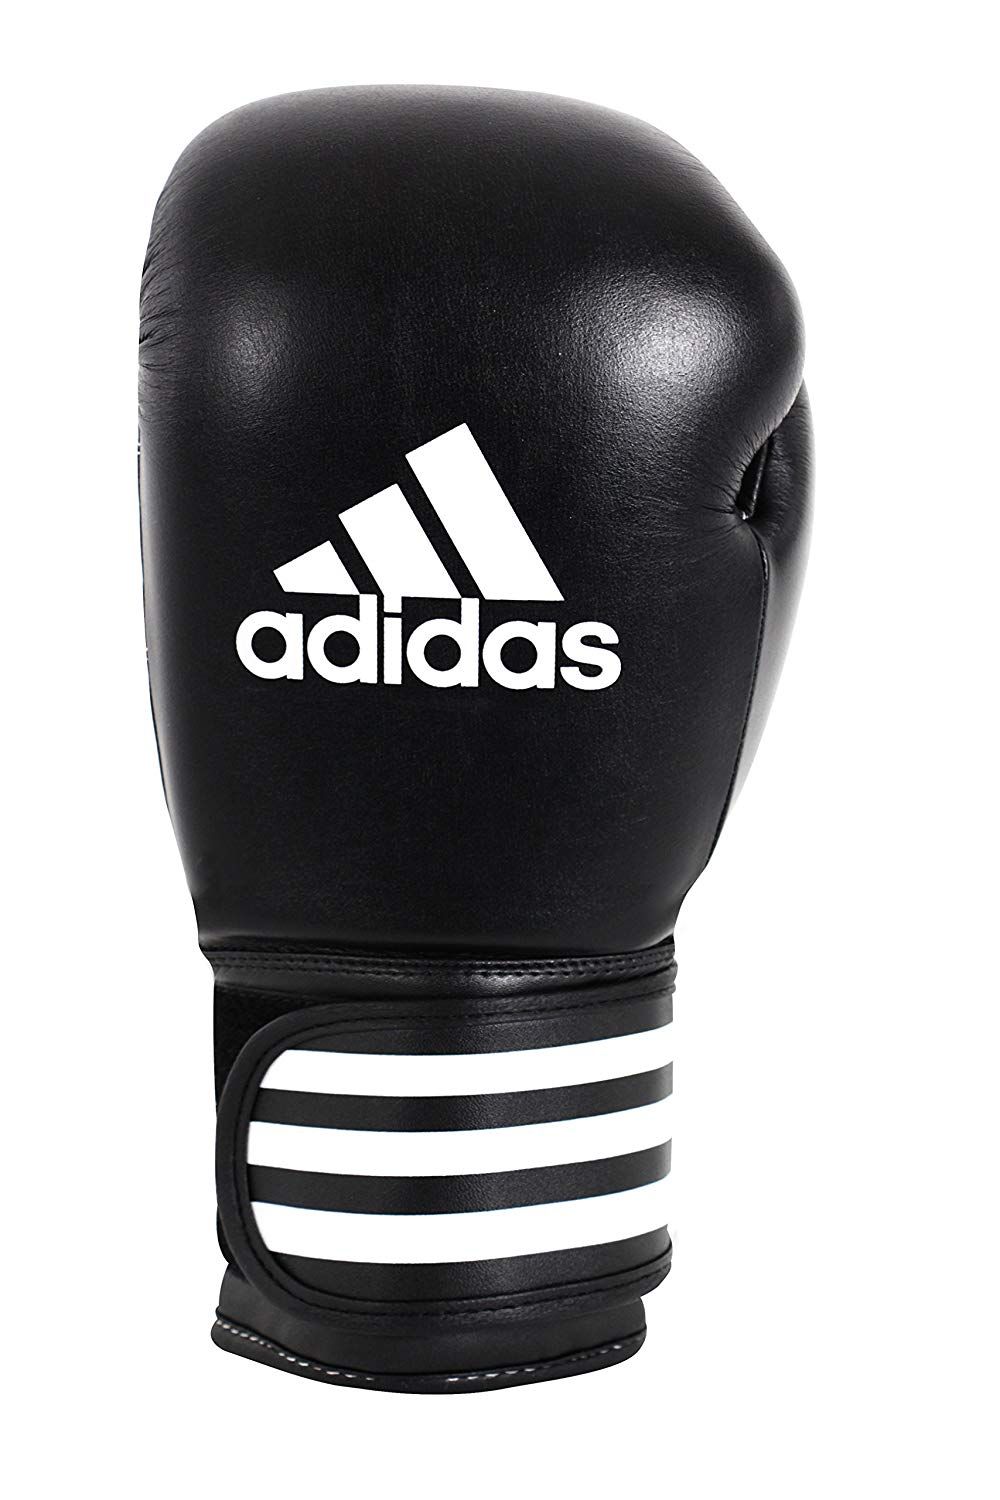 Adidas Performer Boxing Gloves - Boxing Alley